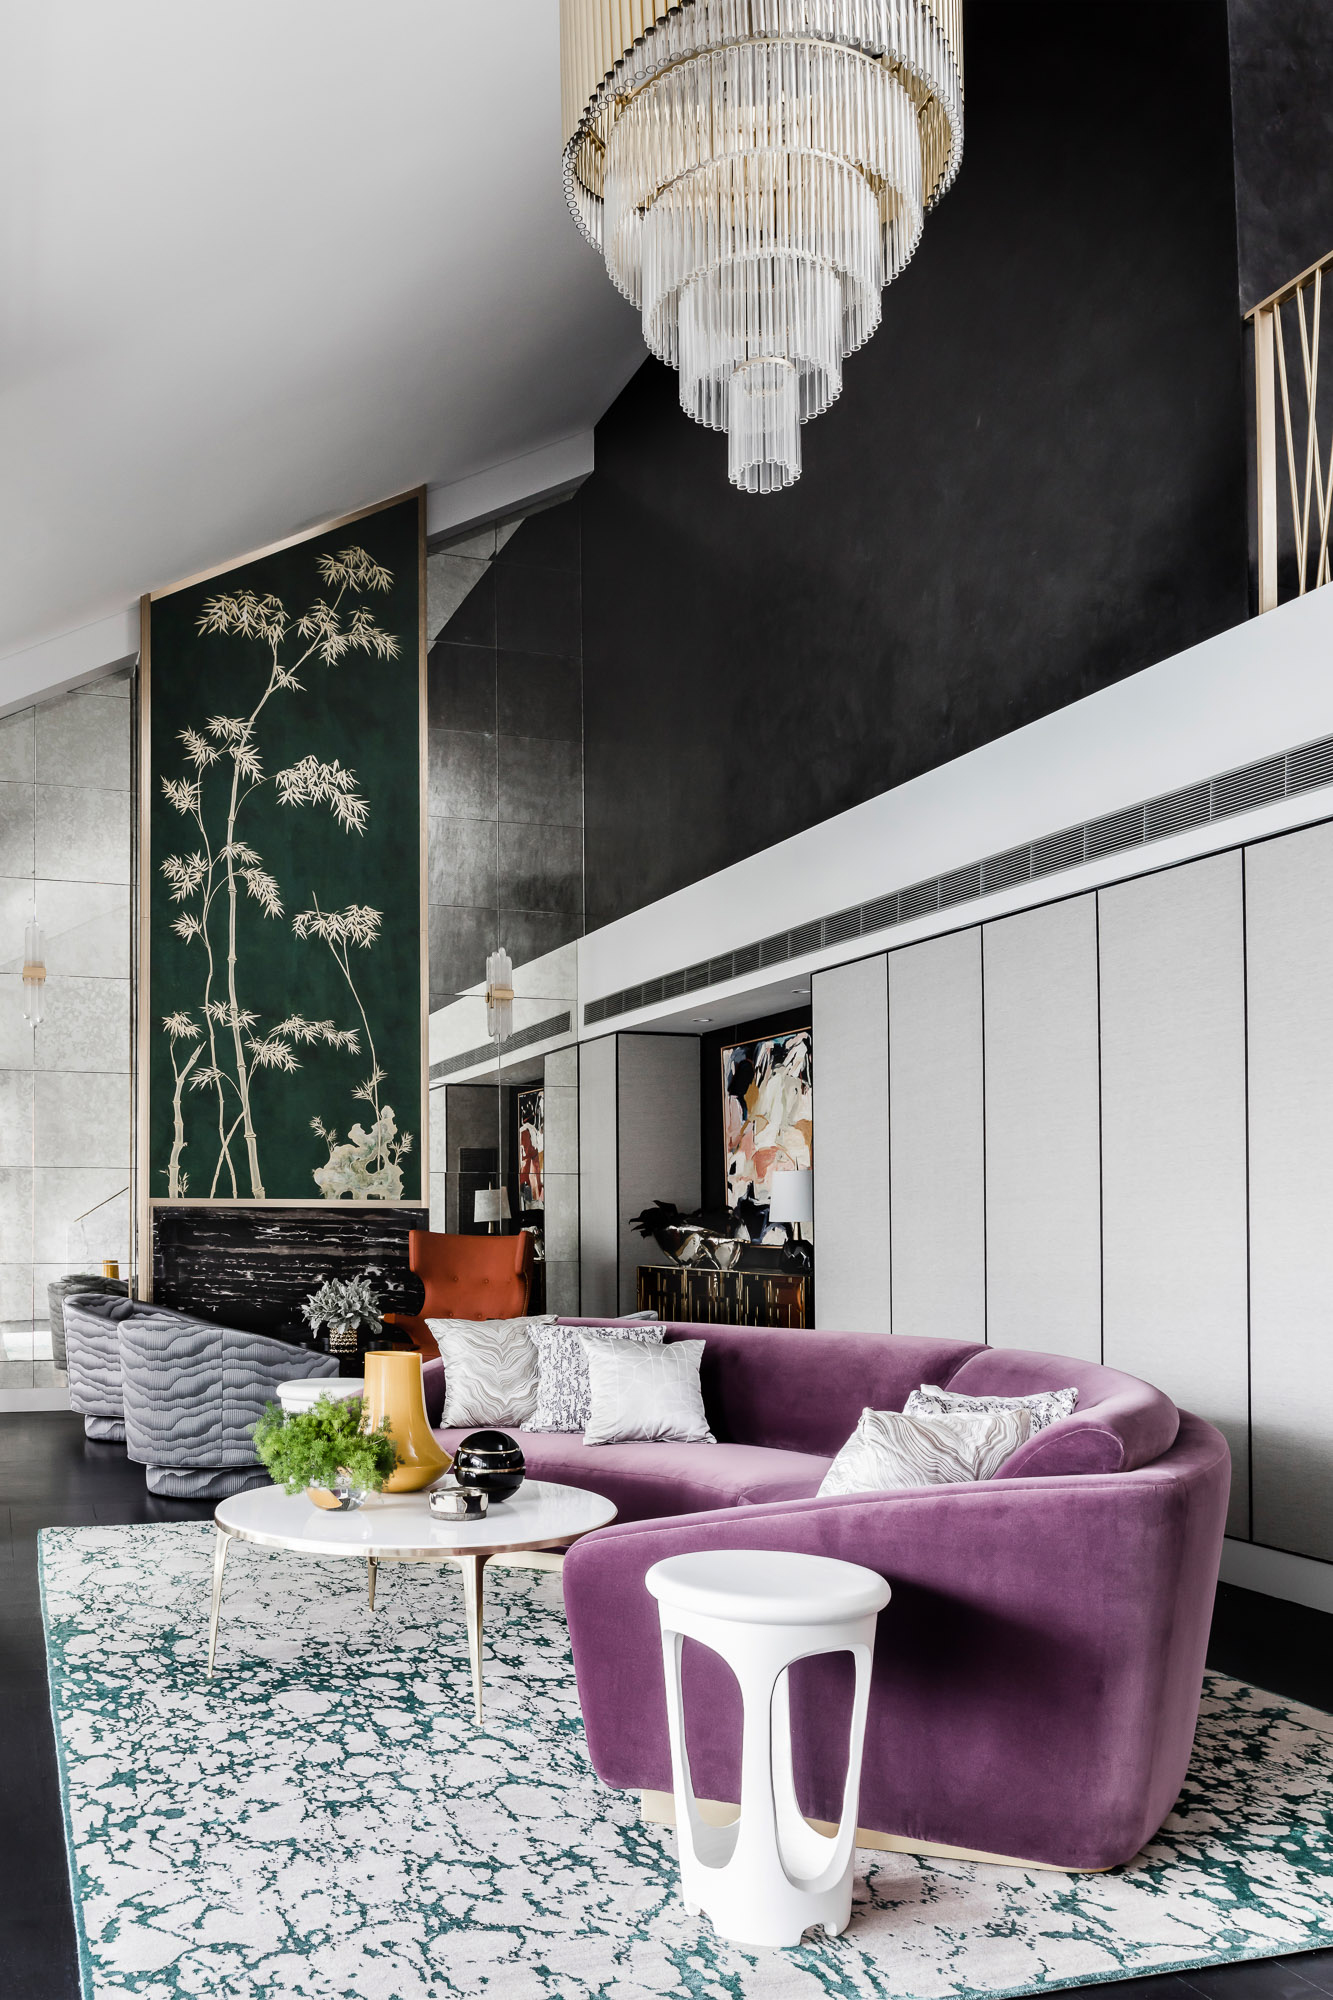 Pyrmont penthouse renovation with black marble fireplace and De Gournay hand painted wallpaper by Sydney interior designers